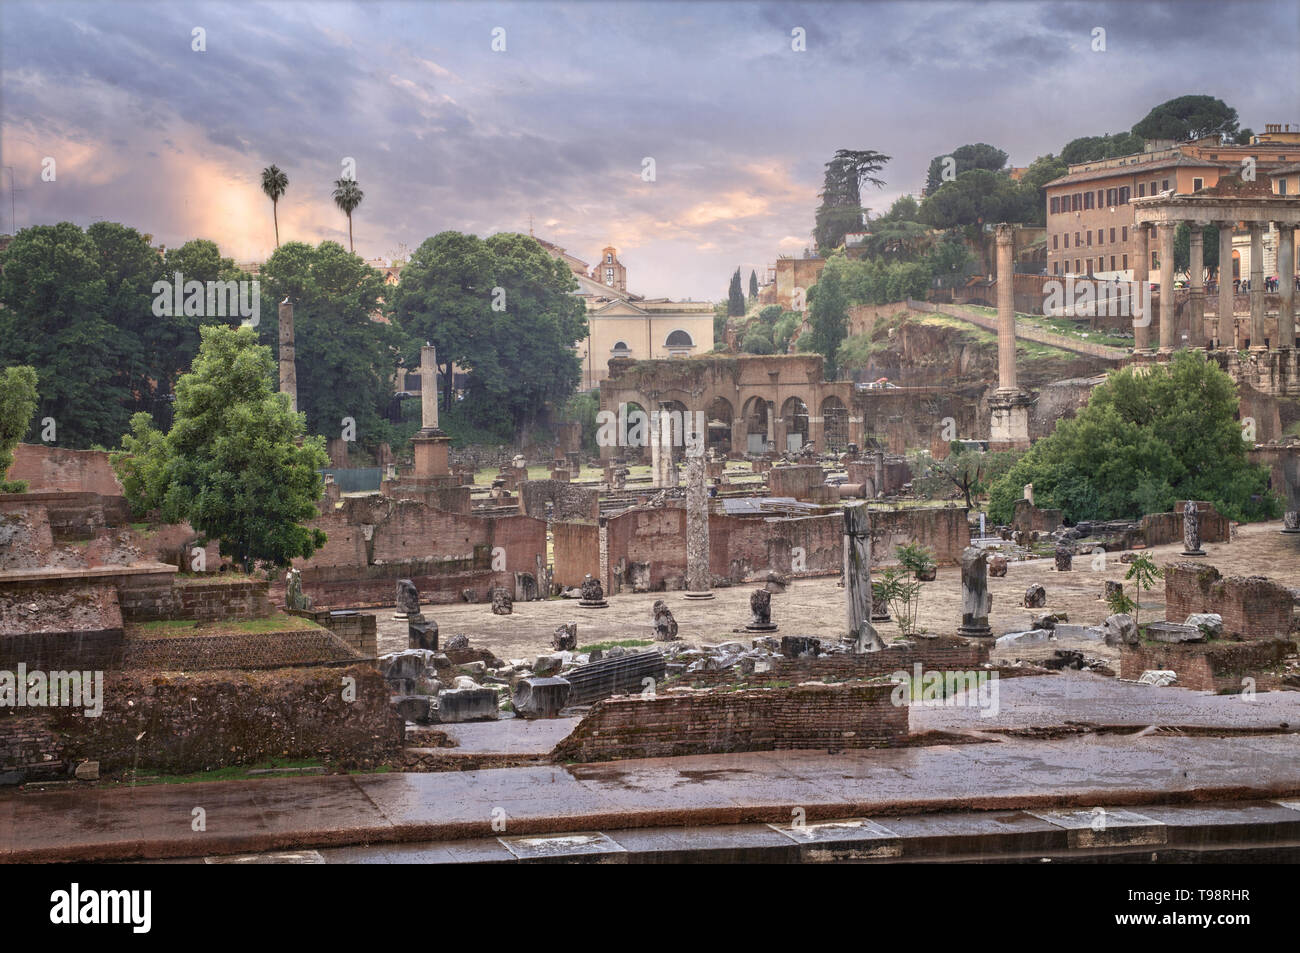 View of the Roman Forum with adjoining buildings in rainy weather. Stock Photo